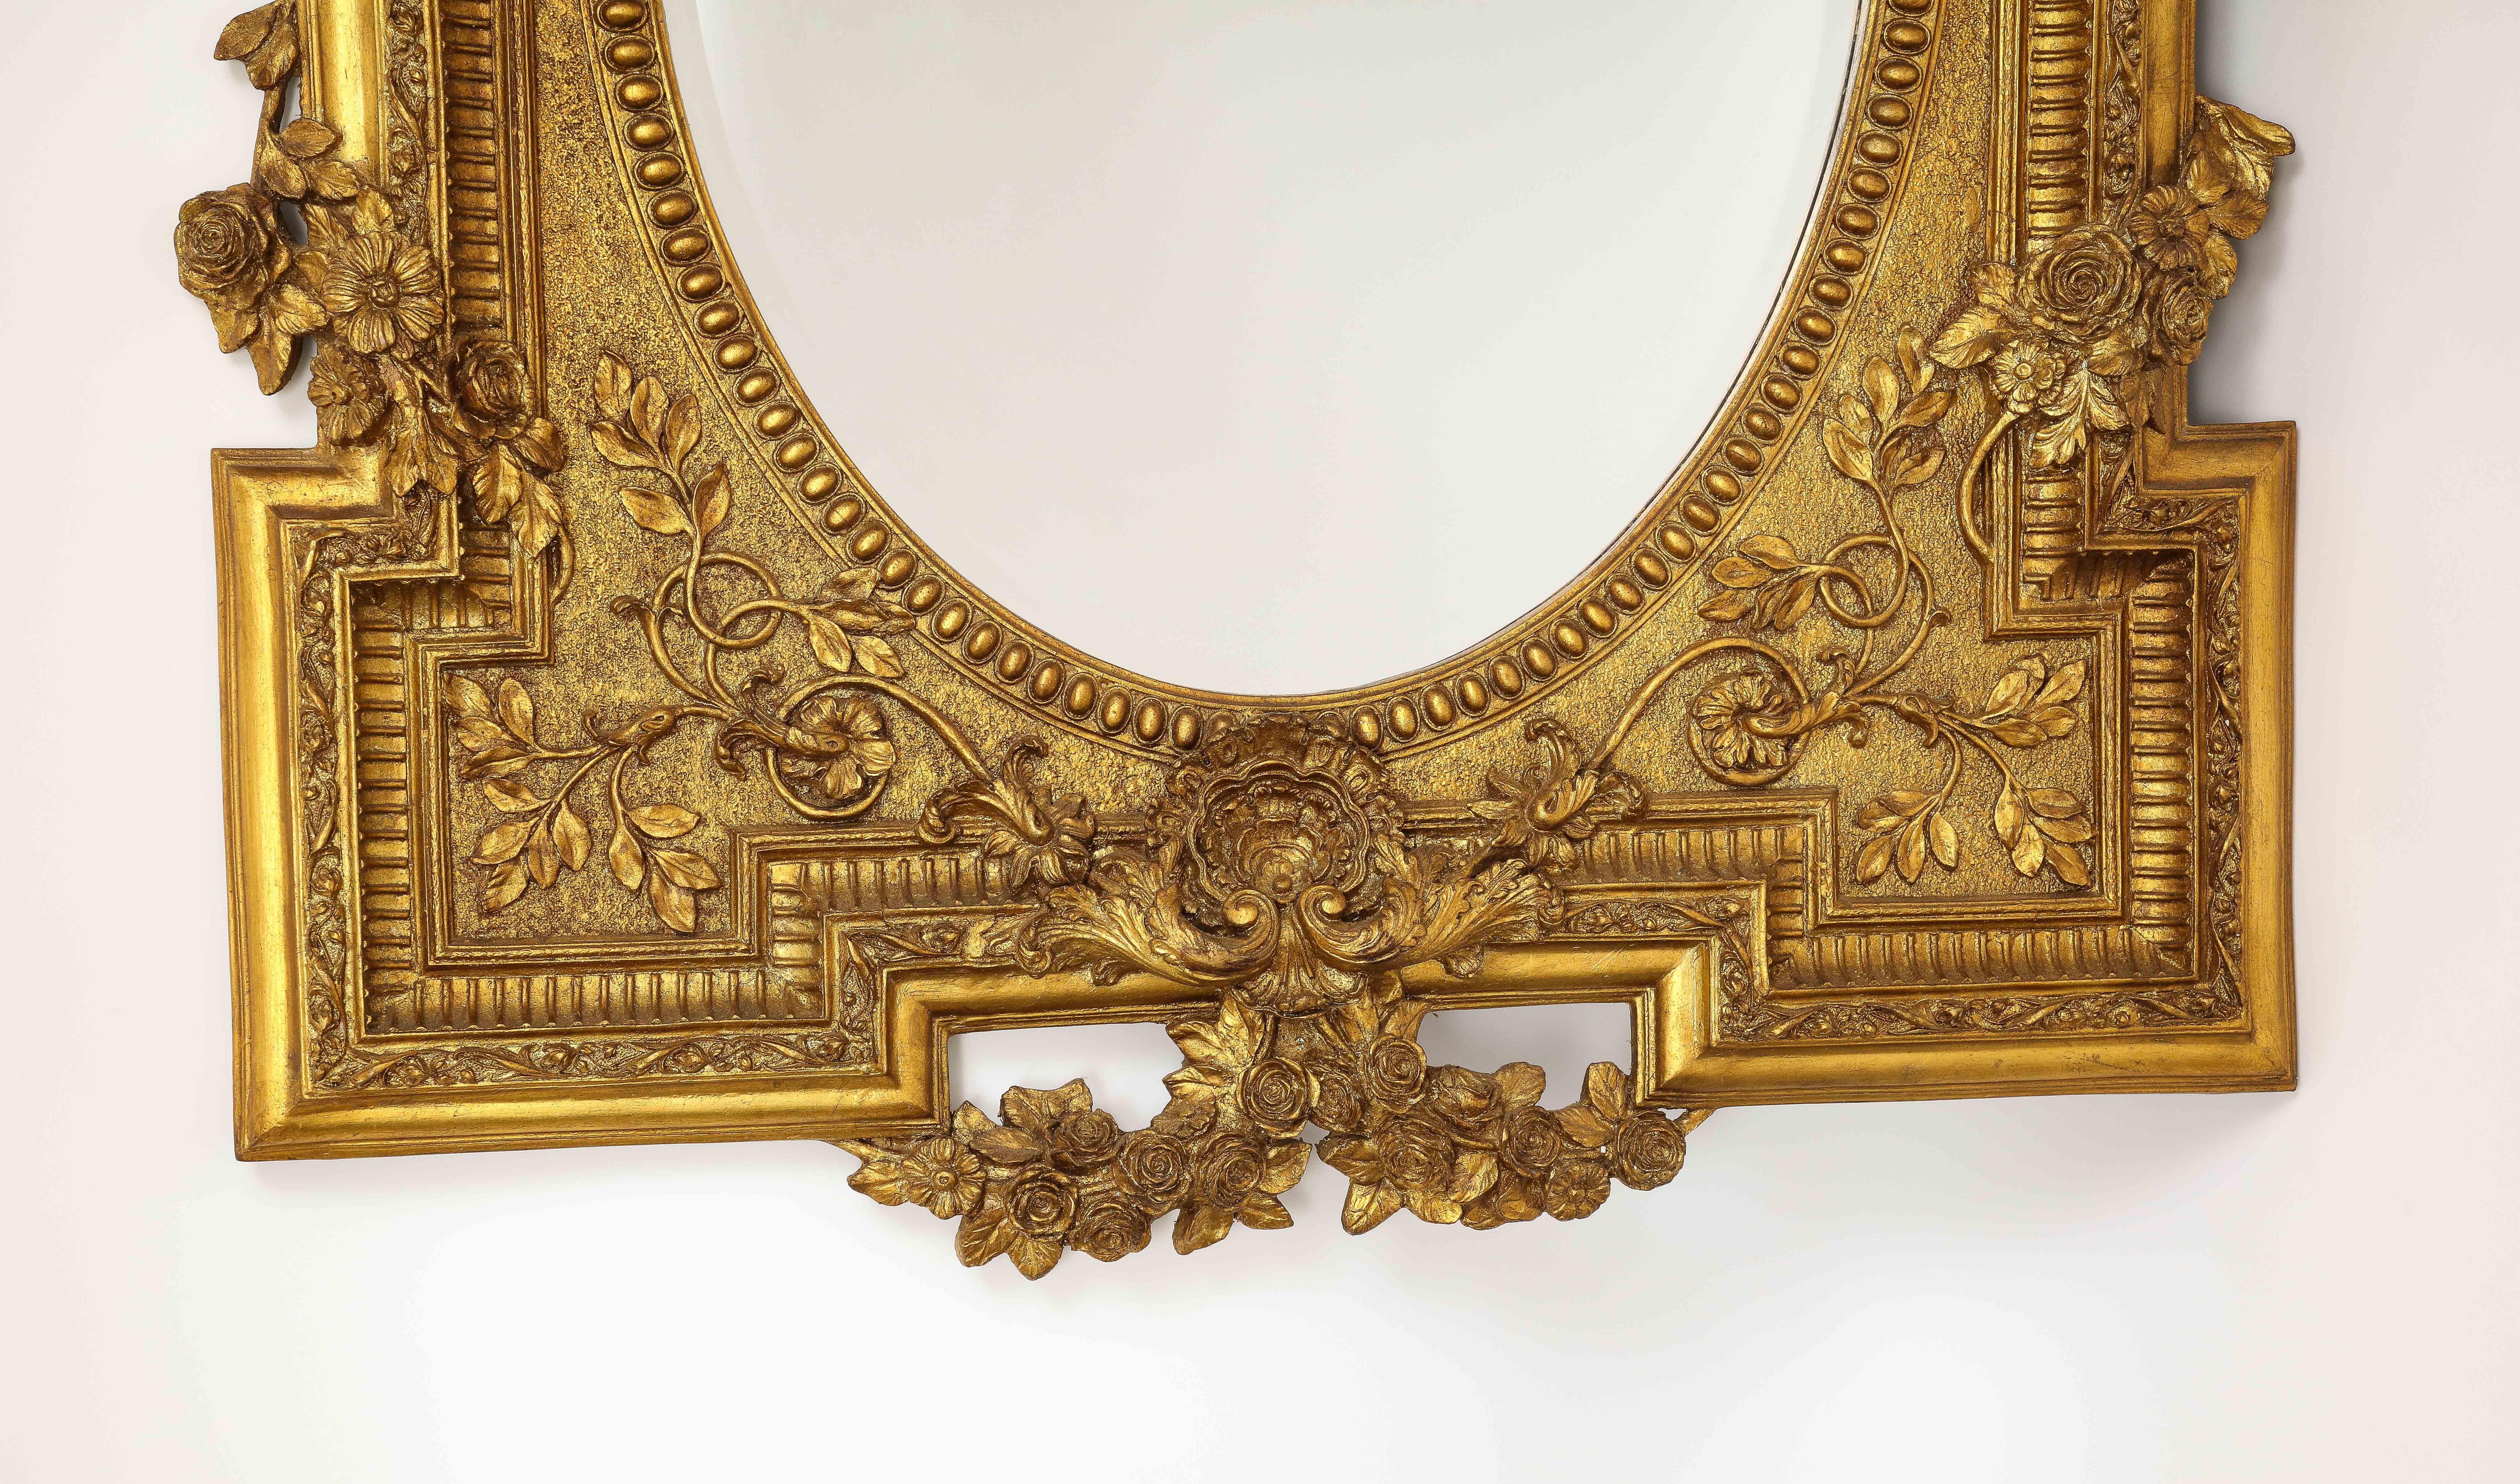 Marvelous French Giltwood Hand-Carved Beveled Mirror with Floral Vine Designs In Good Condition For Sale In New York, NY